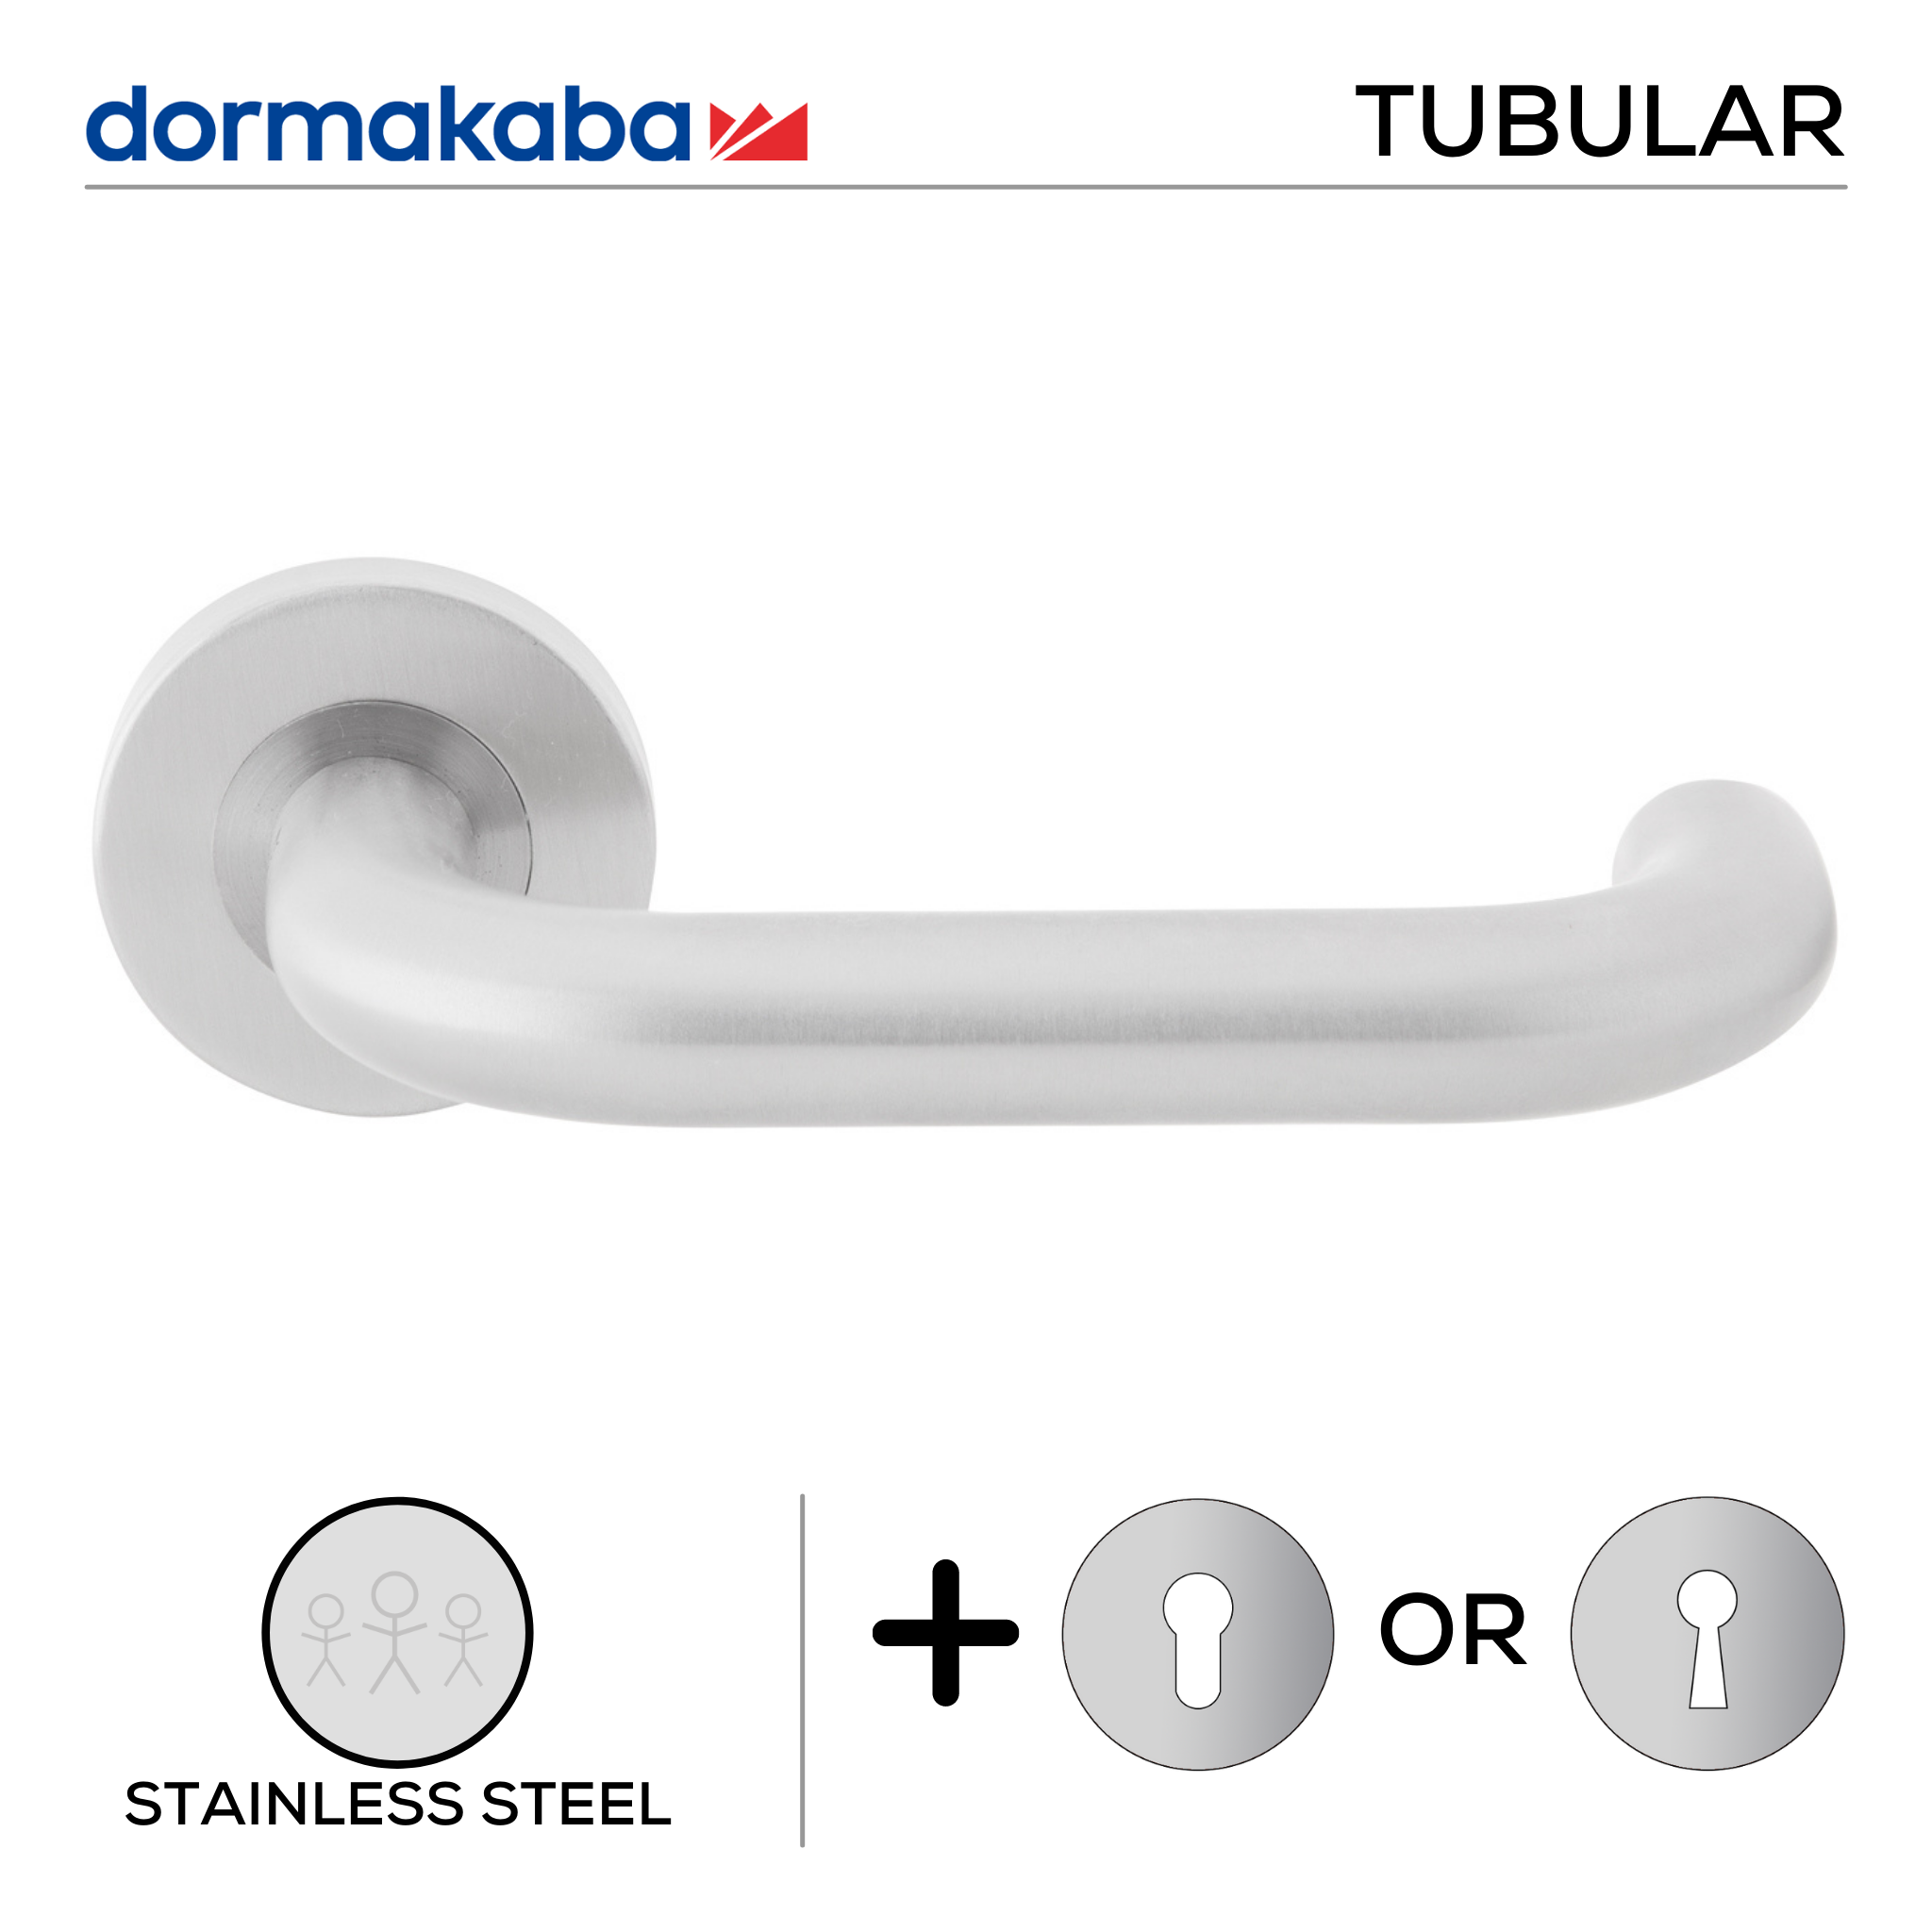 TH 120, Lever Handles, Tubular, On Round Rose, With Escutcheons, 155mm (l), Stainless Steel, DORMAKABA